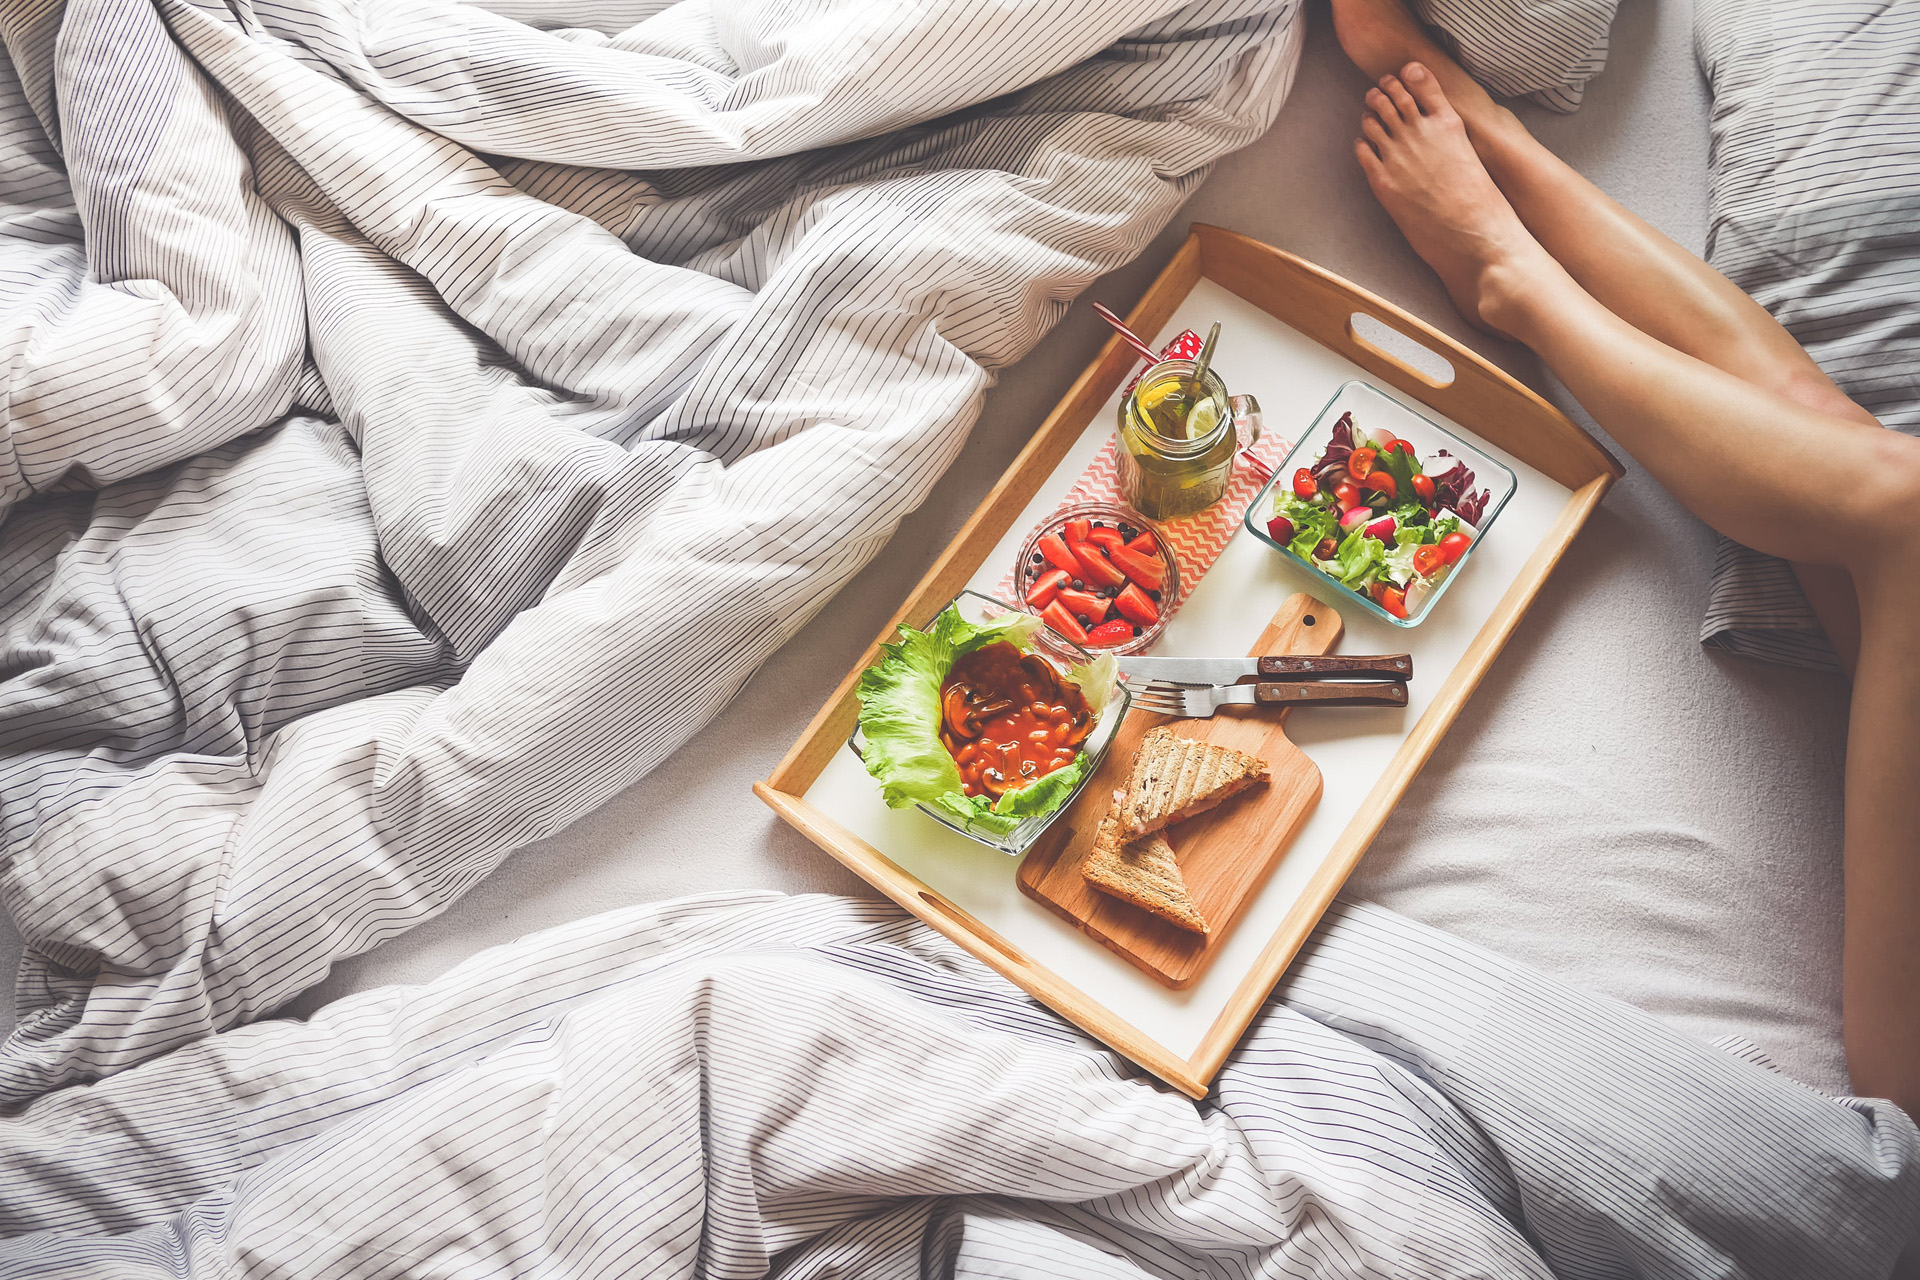 Vegan food on a tray in bed